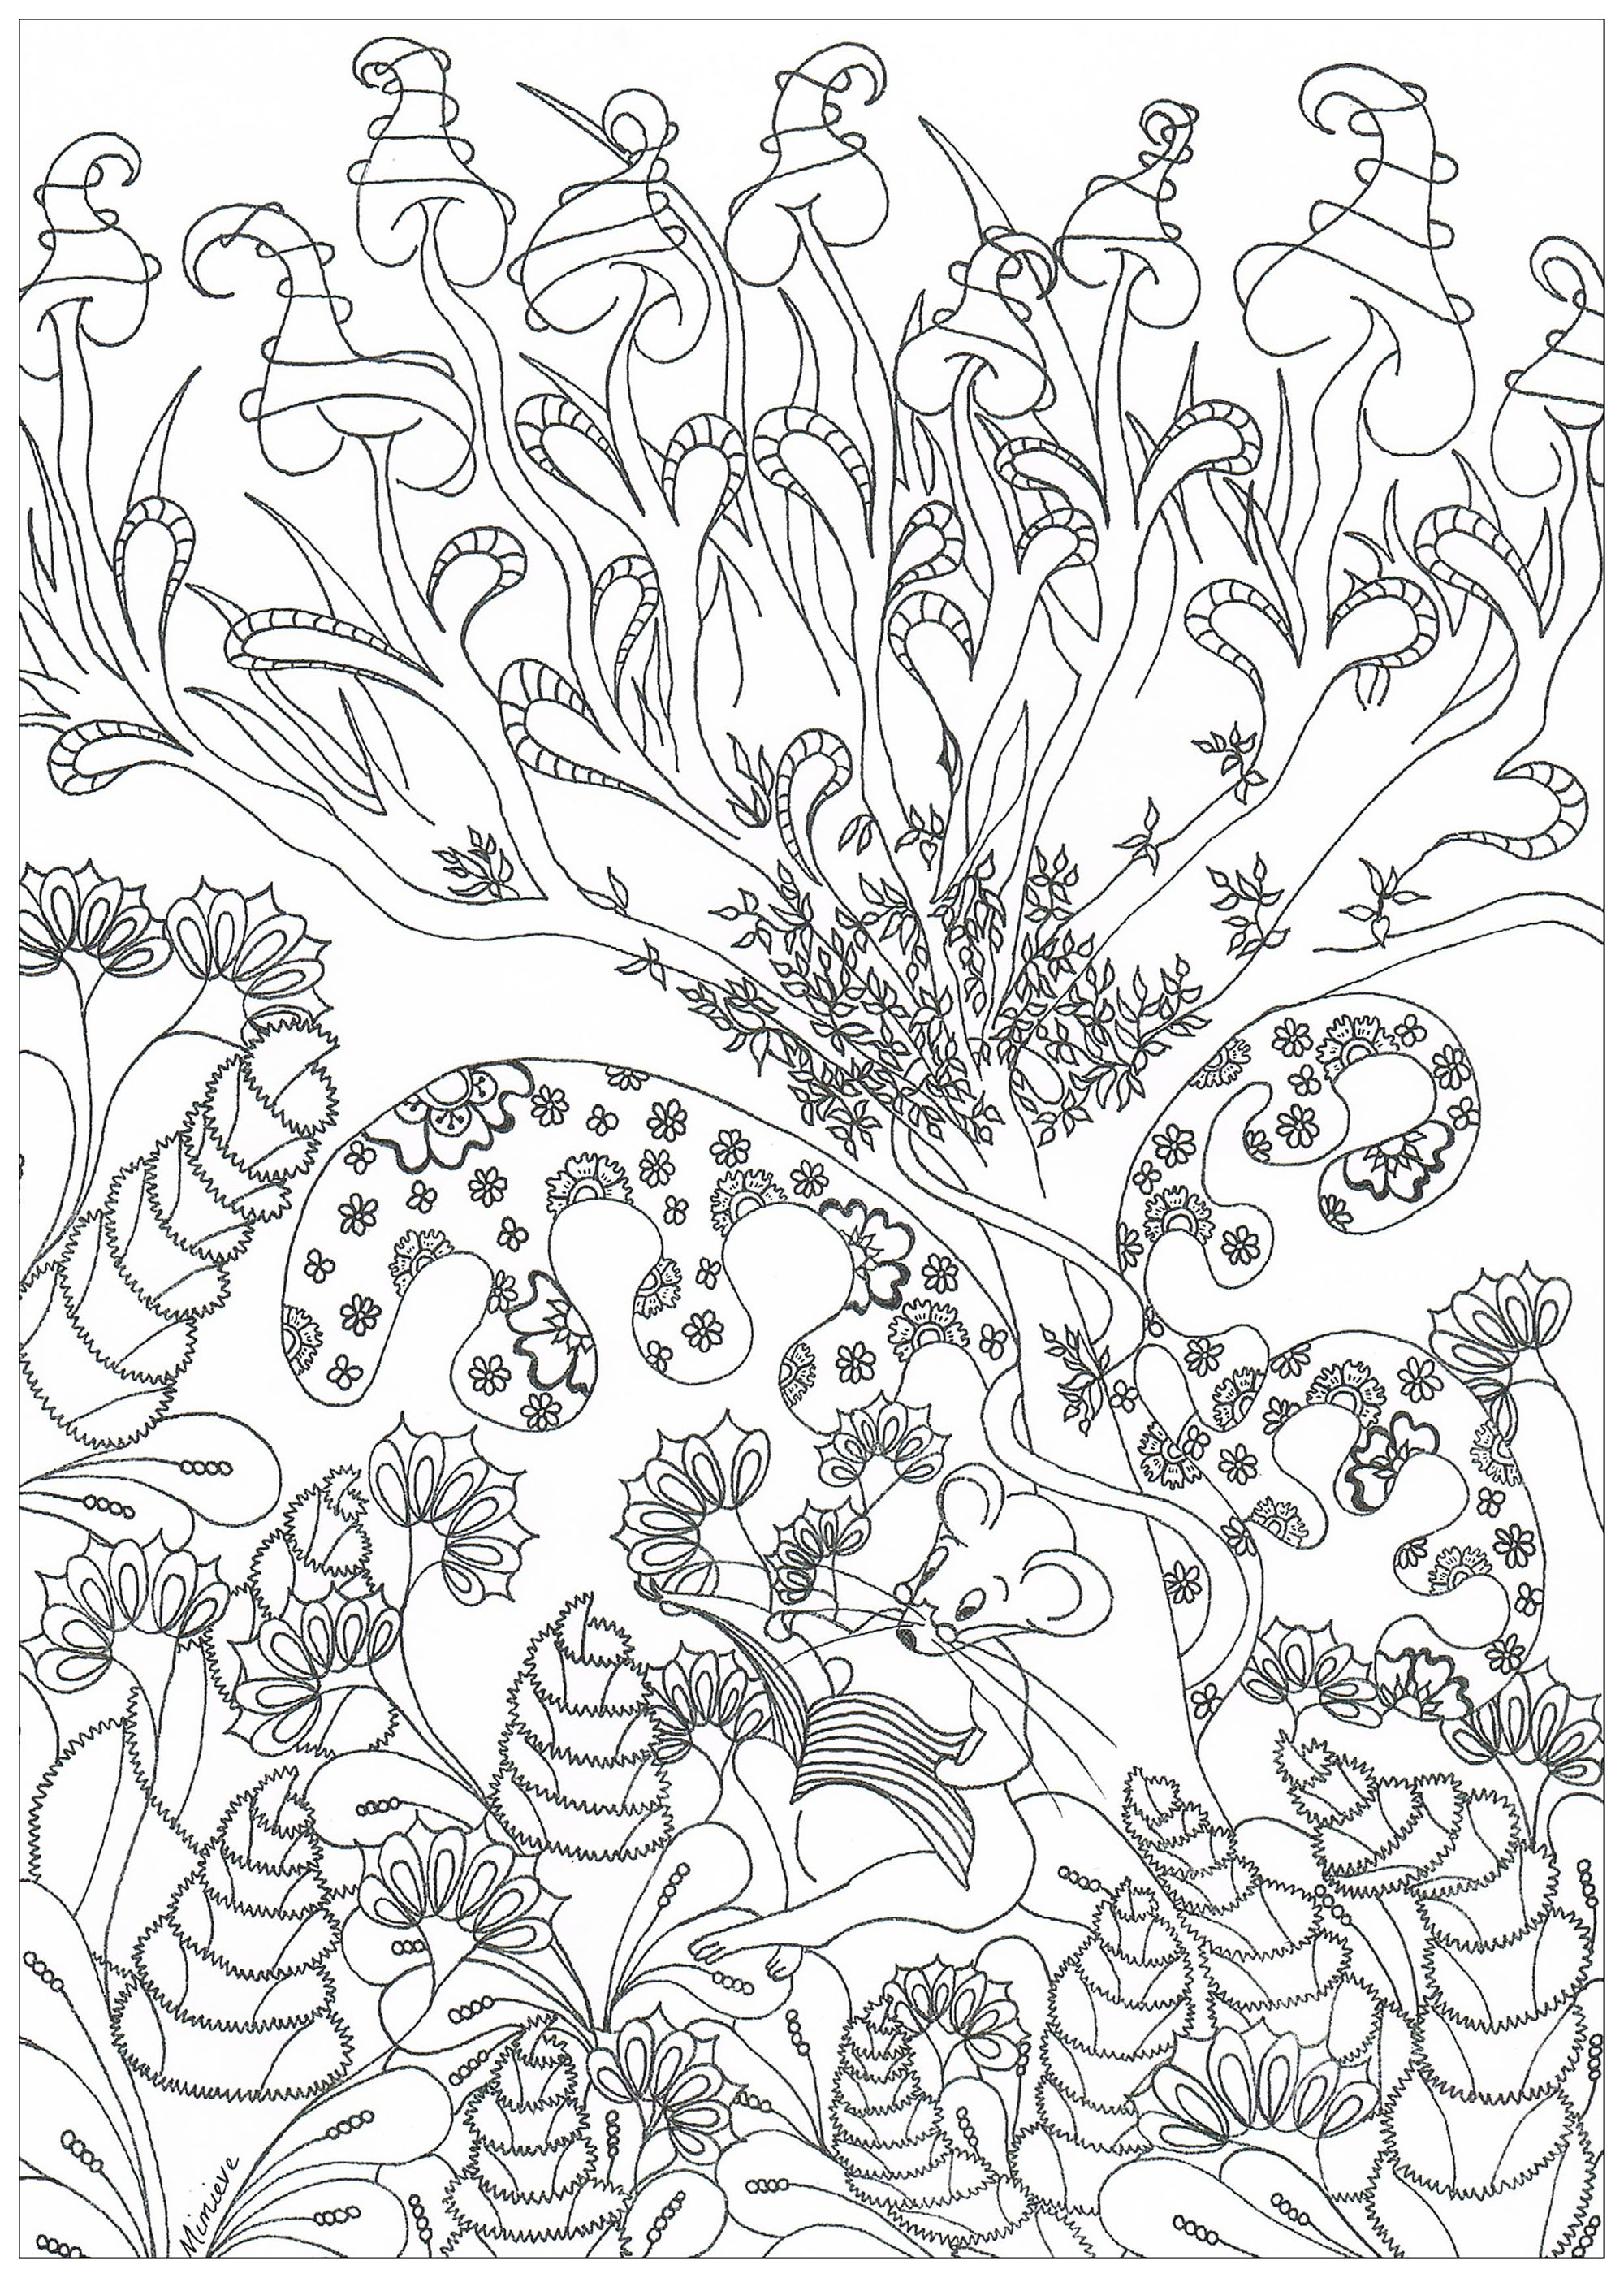 Enchanted forest Jungle & Forest Adult Coloring Pages